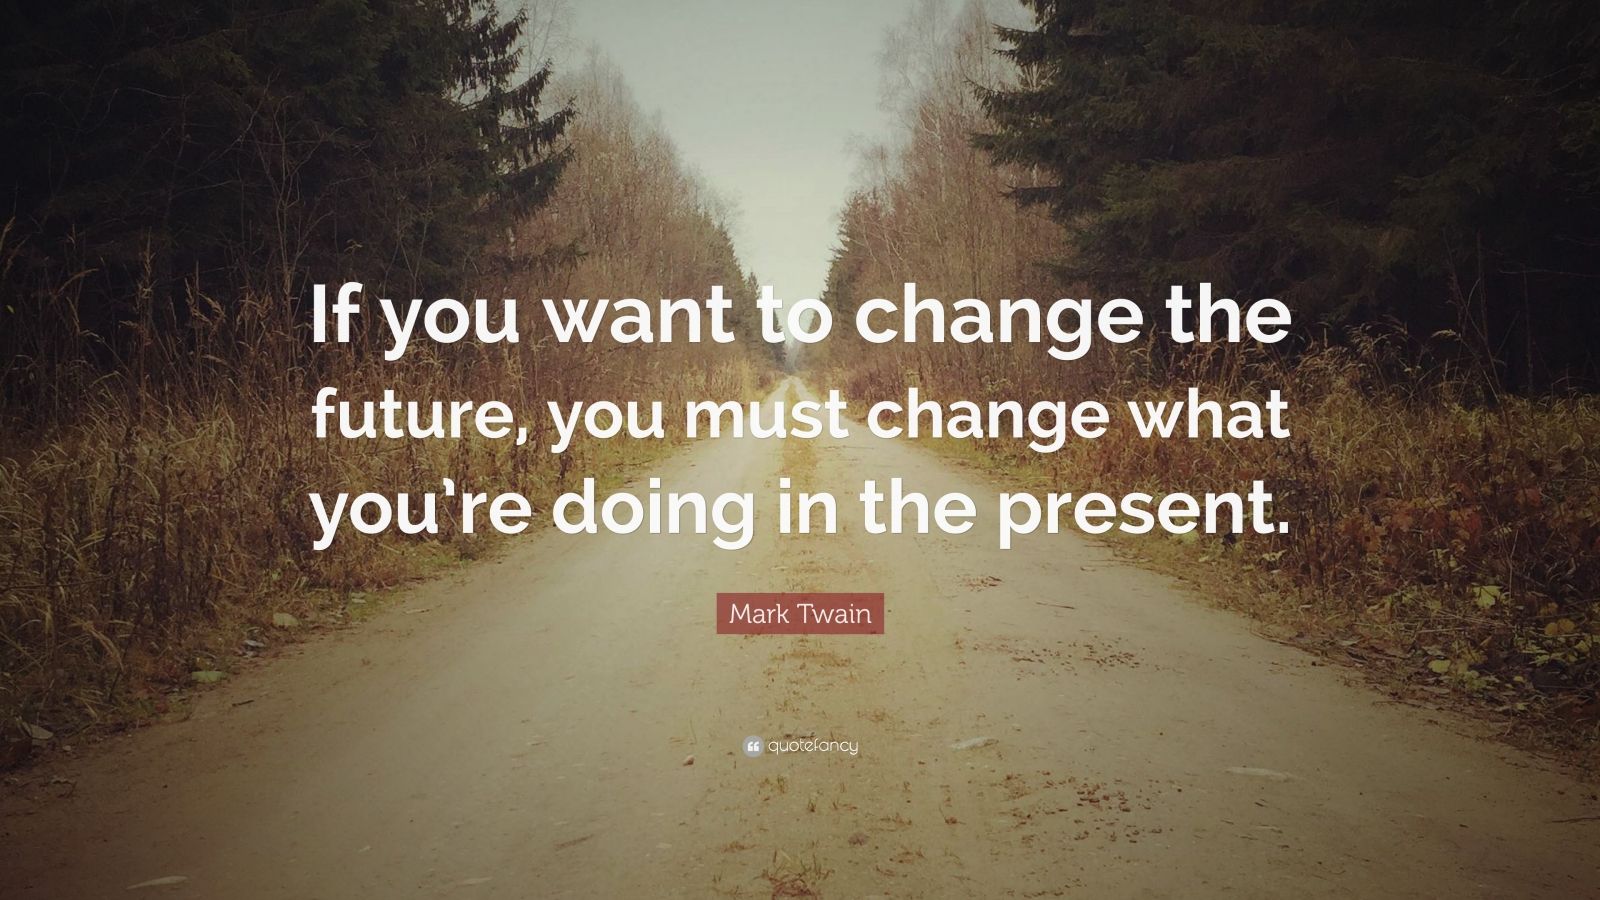 Mark Twain Quote: “If you want to change the future, you must change ...